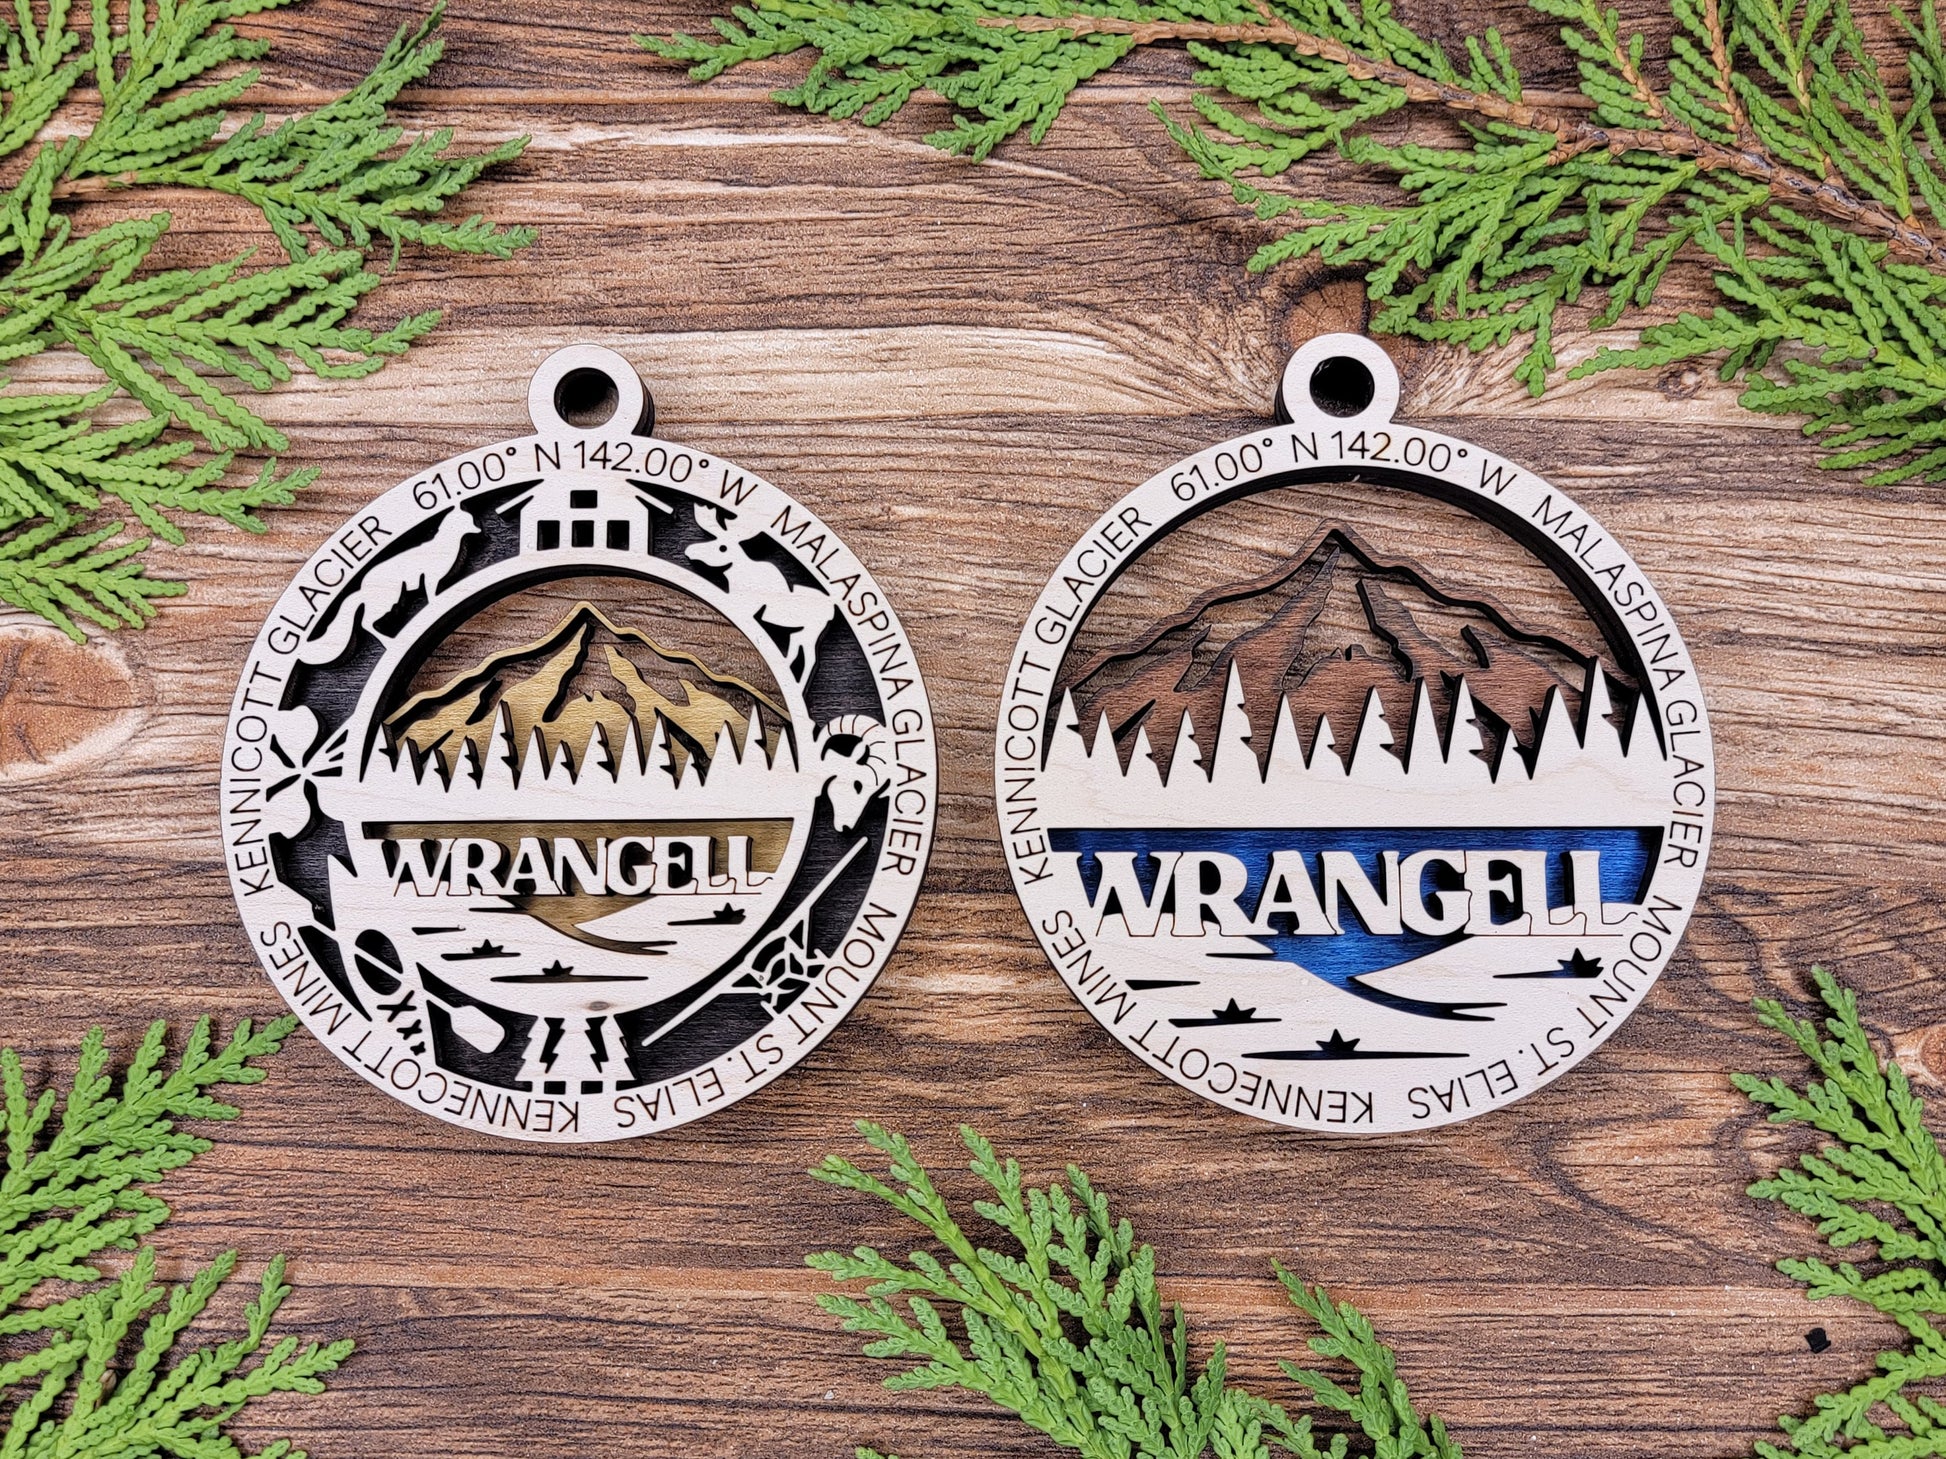 Wrangell Park Ornament - Includes 2 Ornaments - Laser Design SVG, PDF, AI File Download - Tested On Glowforge and LightBurn